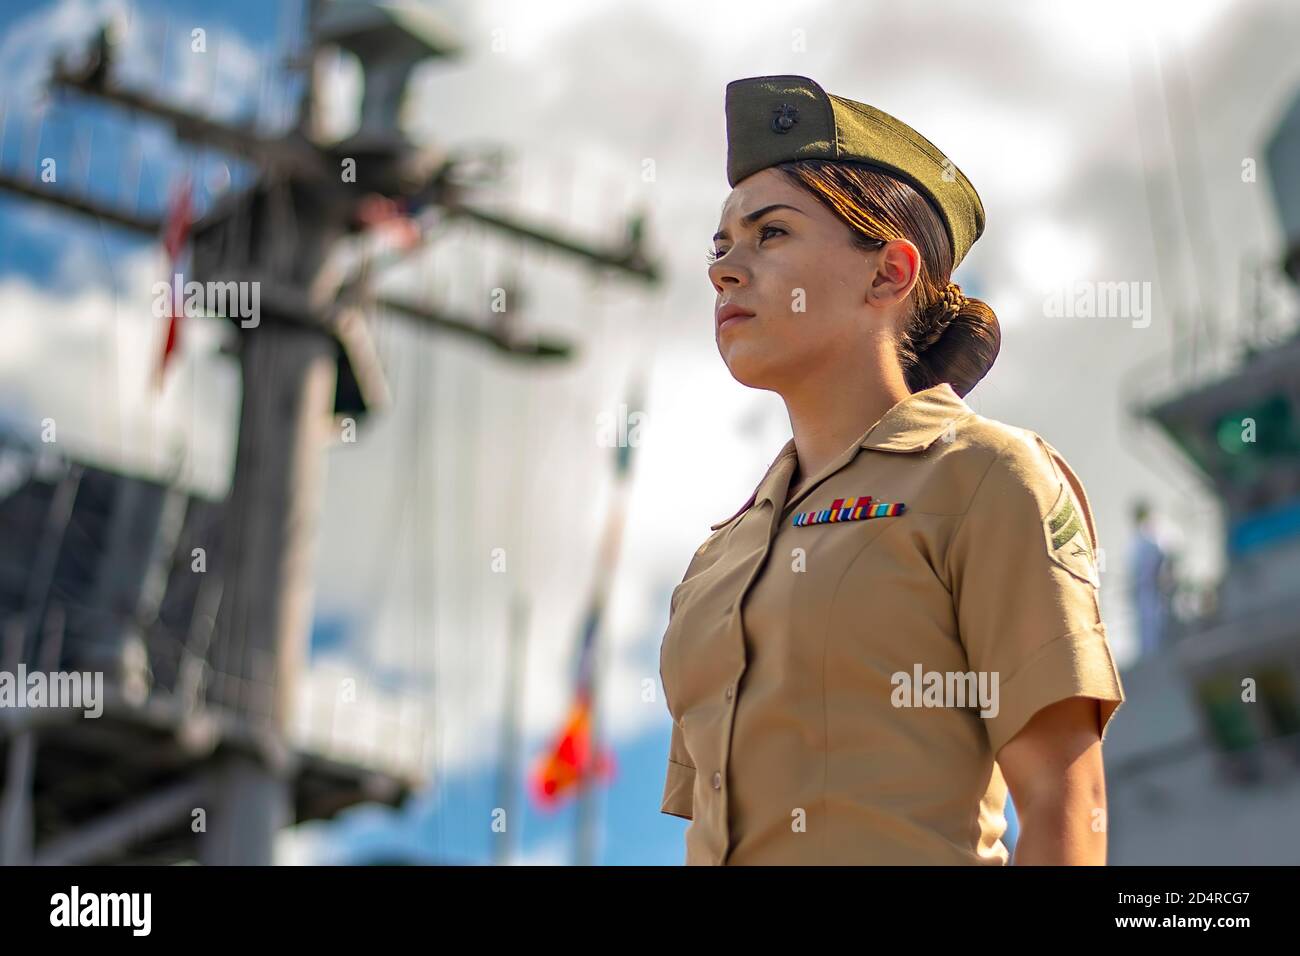 PEARL HARBOR (Nov. 13, 2019) U.S. Marine Corps Cpl. Angela Chang, assigned to 11th Marine Expeditionary Unit (MEU), mans the rails aboard the amphibious assault ship USS Boxer (LHD 4) before a scheduled port visit to Pearl Harbor, Hawaii. The Boxer Amphibious Ready Group (ARG) and 11th Marine Expeditionary Unit (MEU) are deployed to the U.S. 7th Fleet area of operations to support regional stability, reassure partners and allies, and maintain a presence to respond to any crisis ranging from humanitarian assistance to contingency operations. Stock Photo